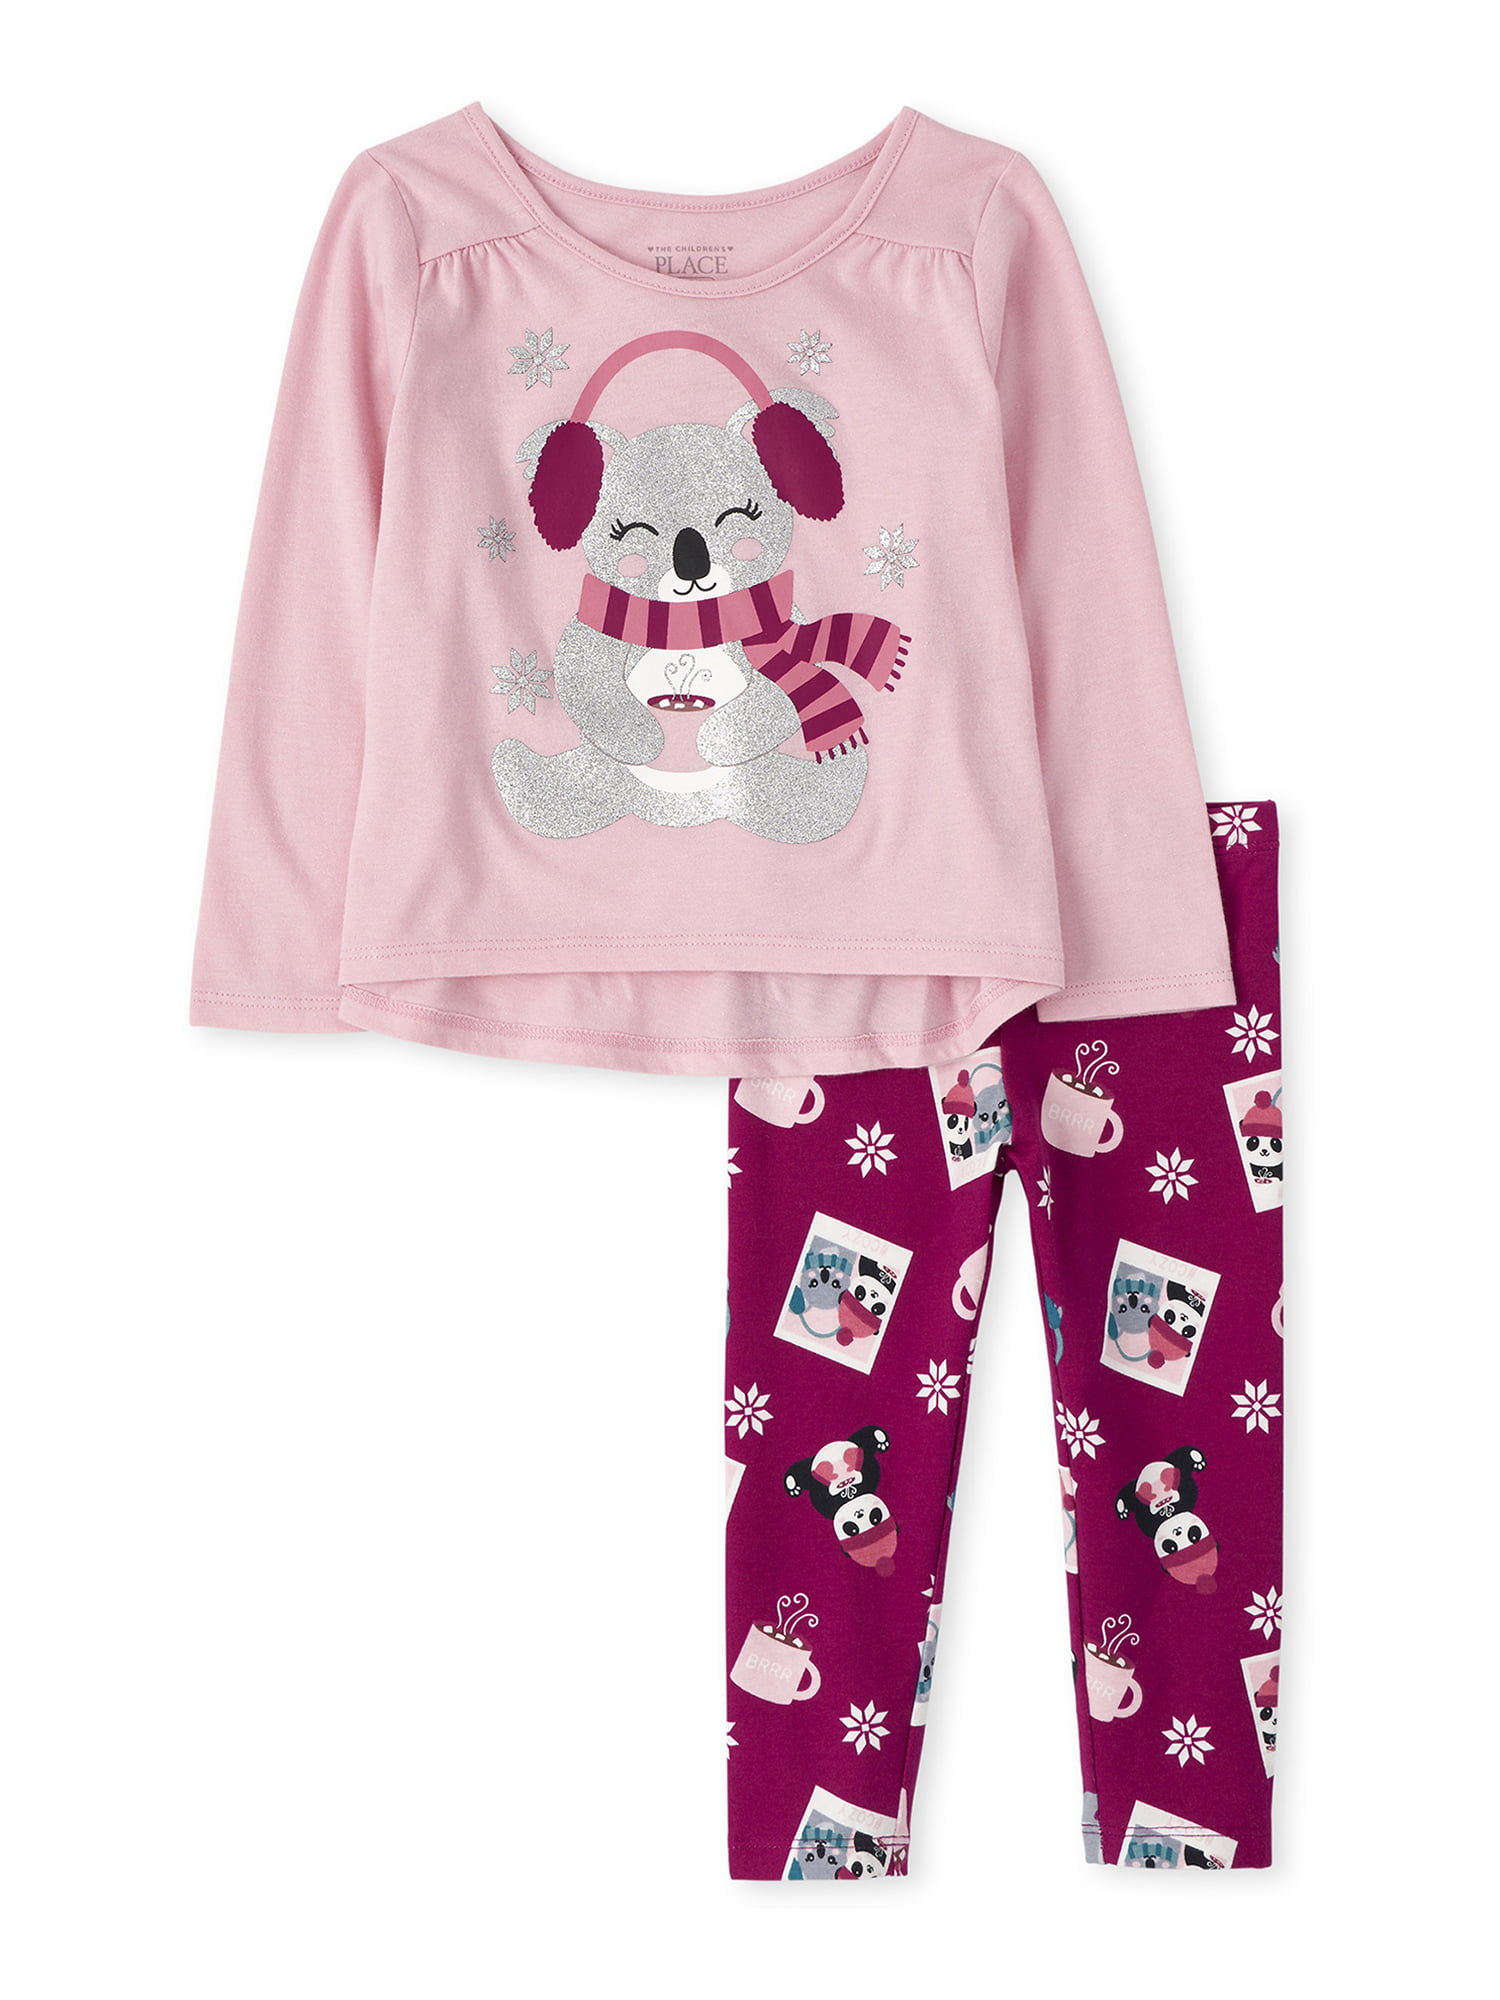 The Childrens Place Girls Toddler Long Sleeve Graphic Shirt 